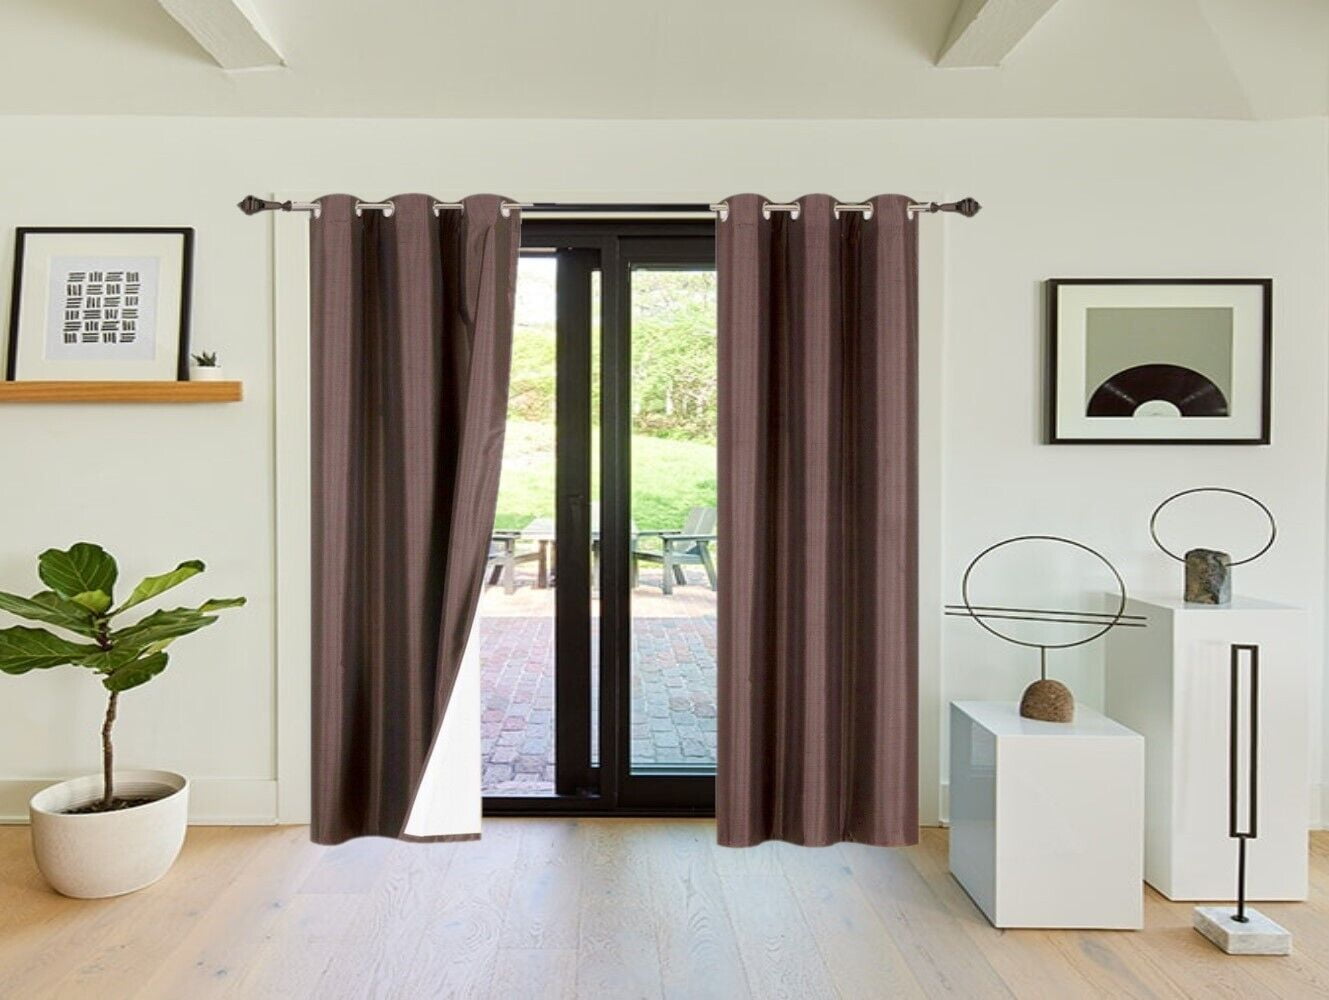 Sage Green Color 1 Panel Grommets Top Window Treatment Curtain Thermal Insulated Blackout Drape Blocking Sun Light Size 28 inch Wide x 36 inch Length